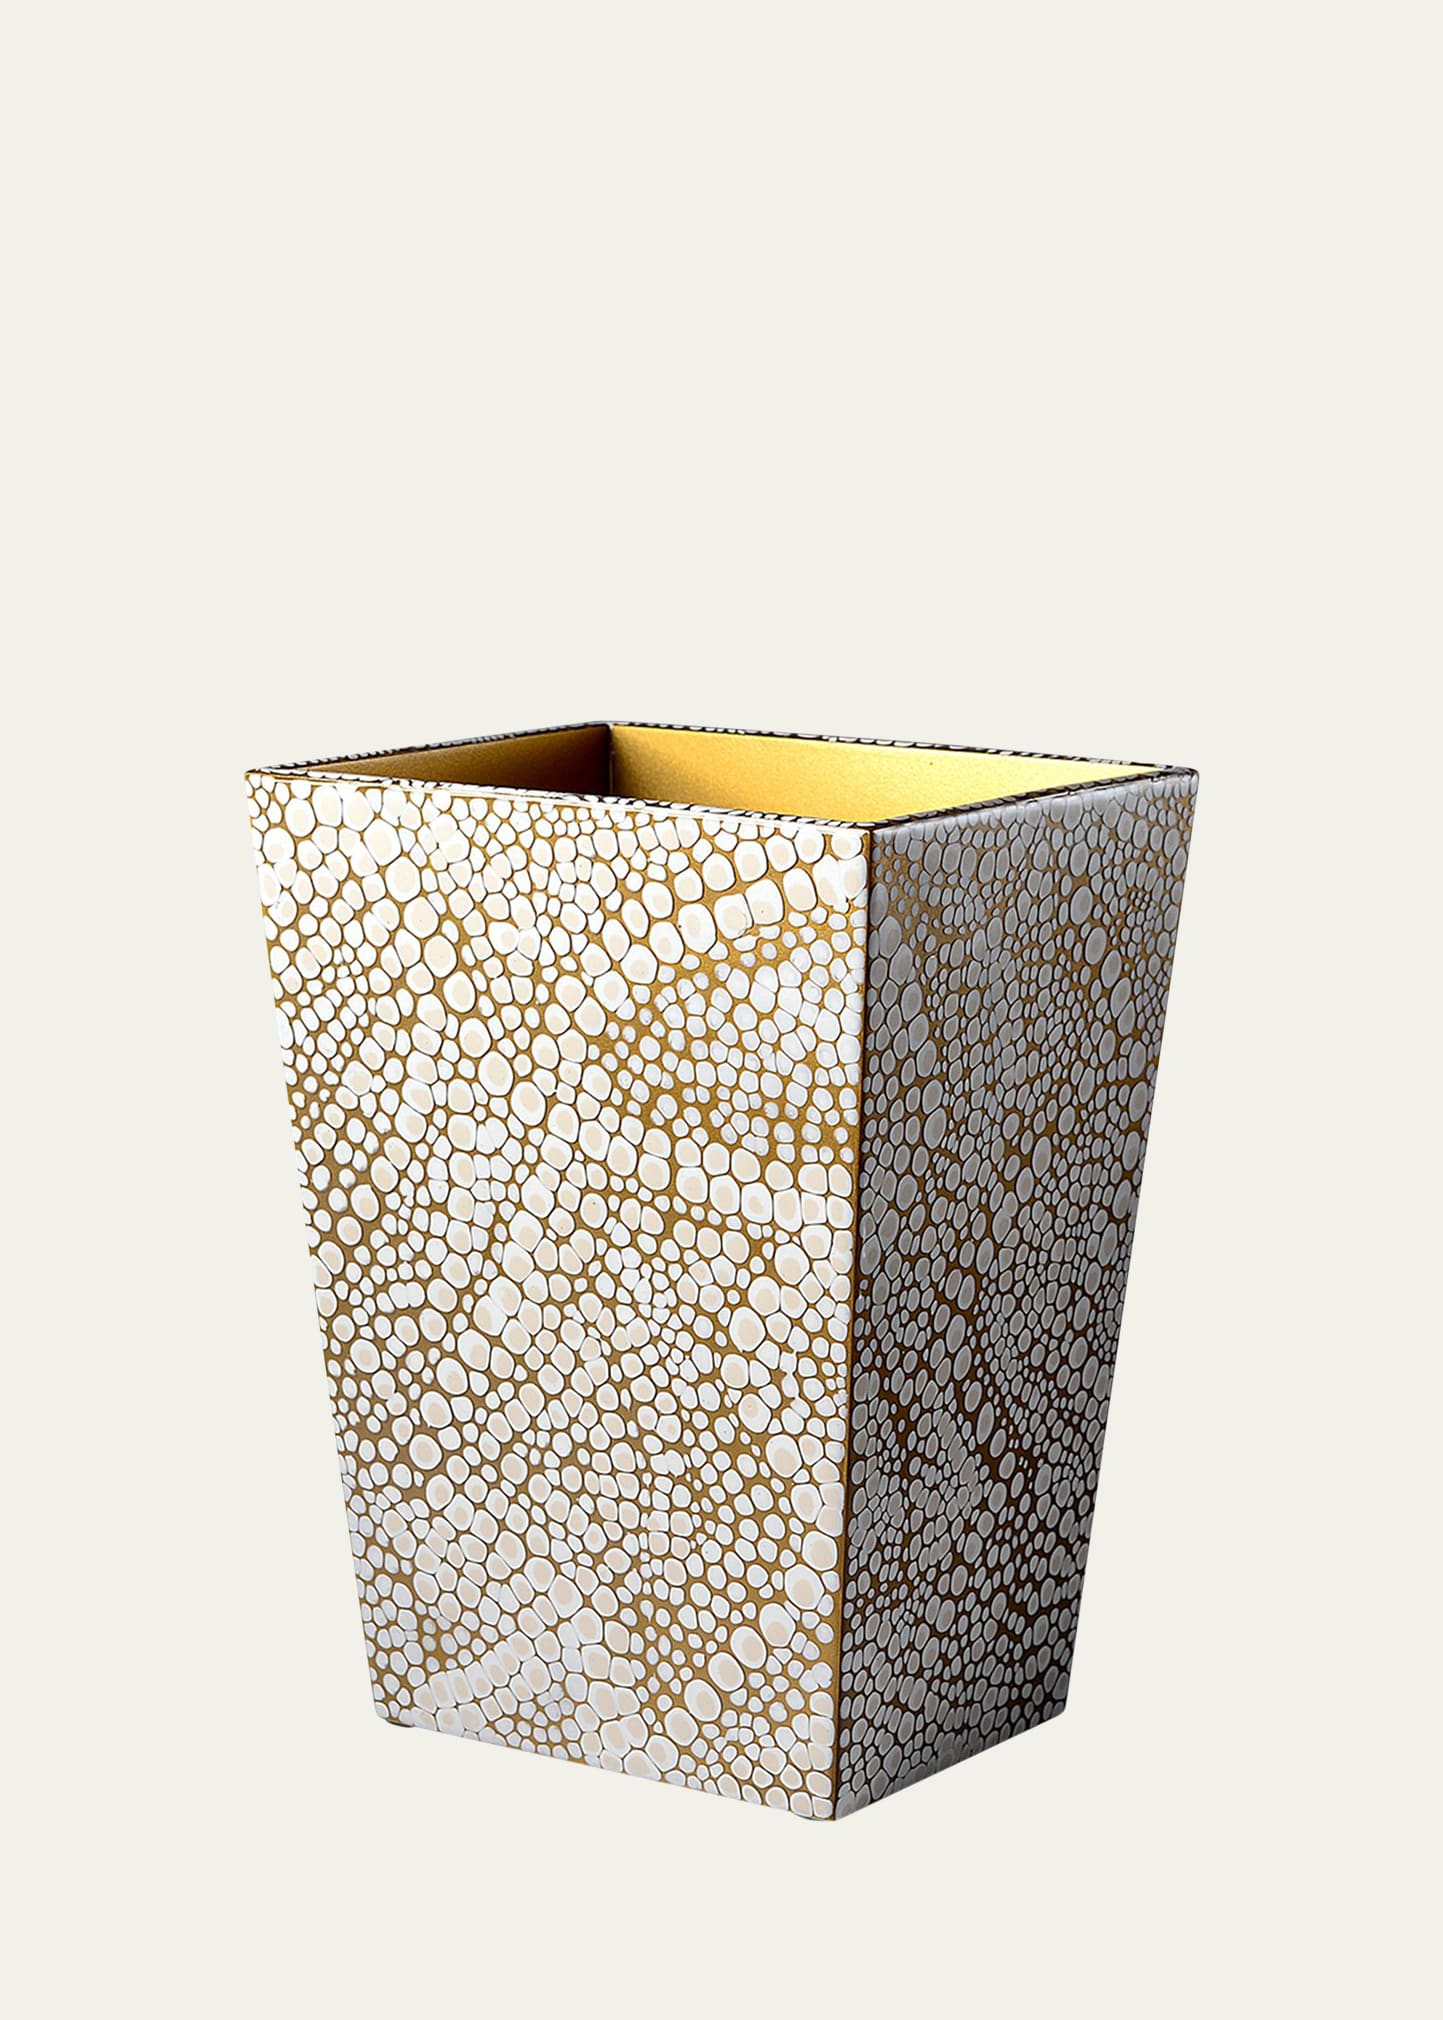 Mike & Ally Prosecco Wastebasket And Liner In Neutral